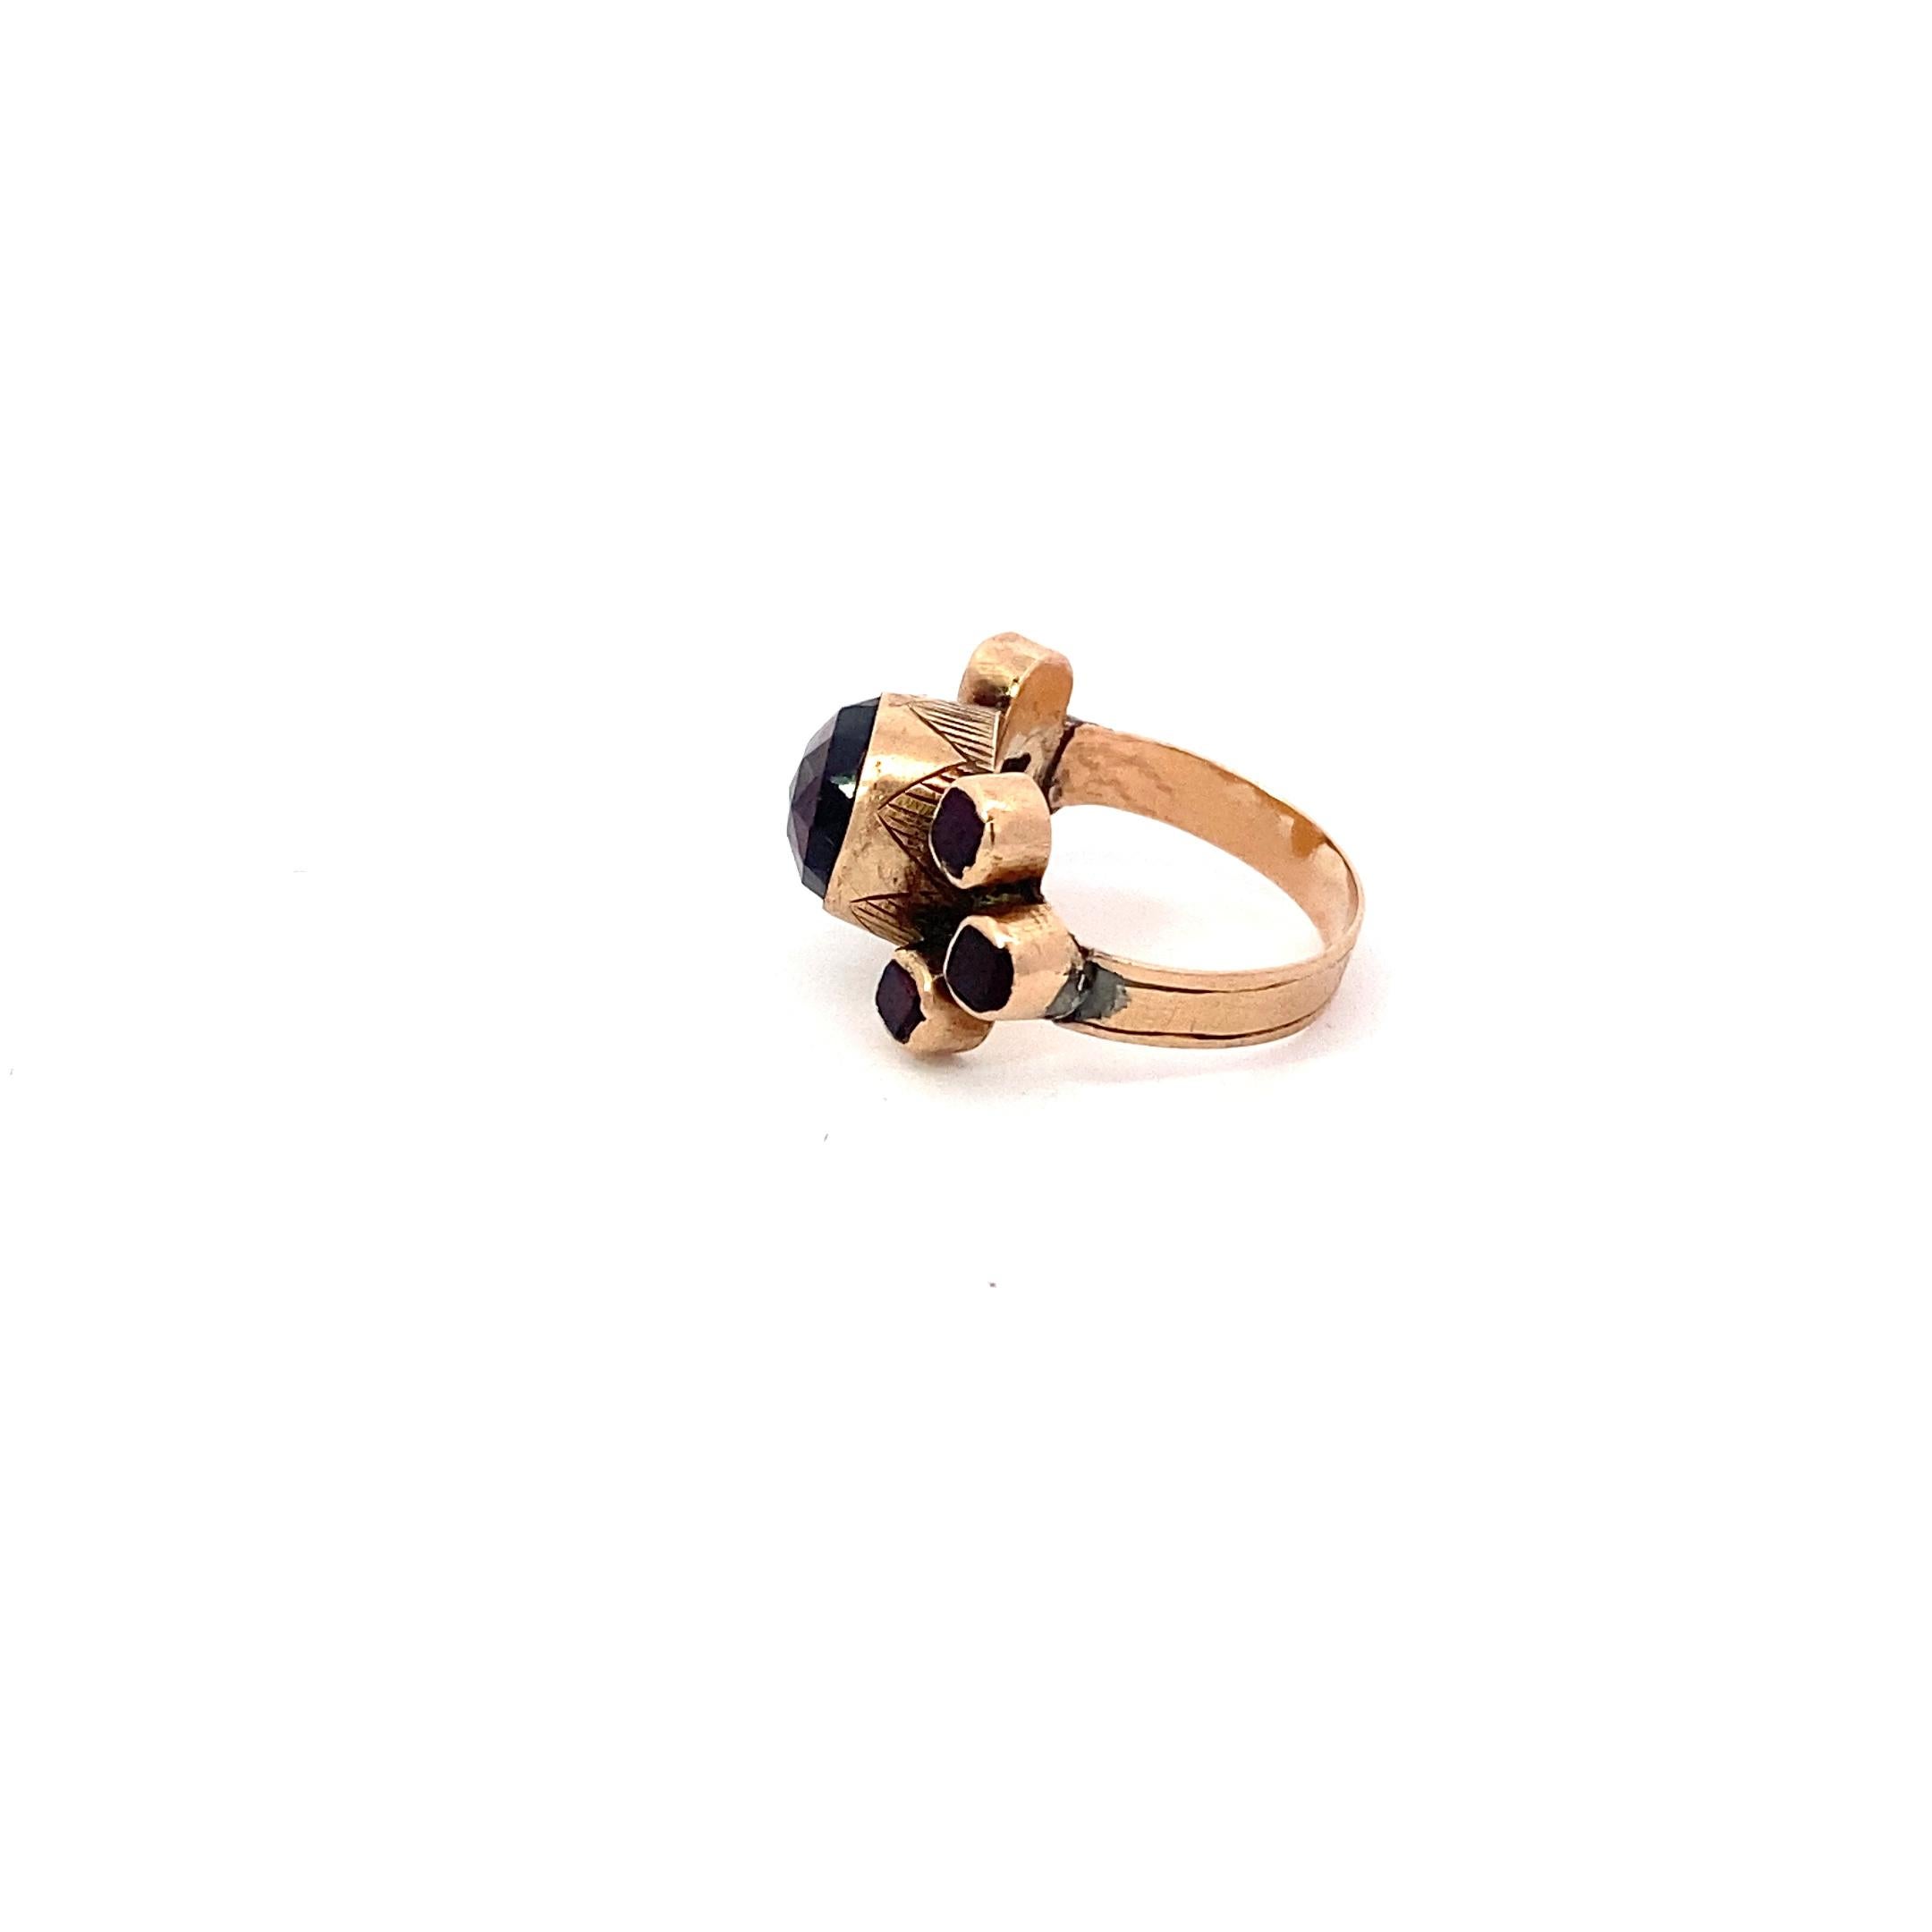 Iberian Ring with Rose Cut Garnets, 9-12k, 1700s In Good Condition For Sale In Brooklyn, NY